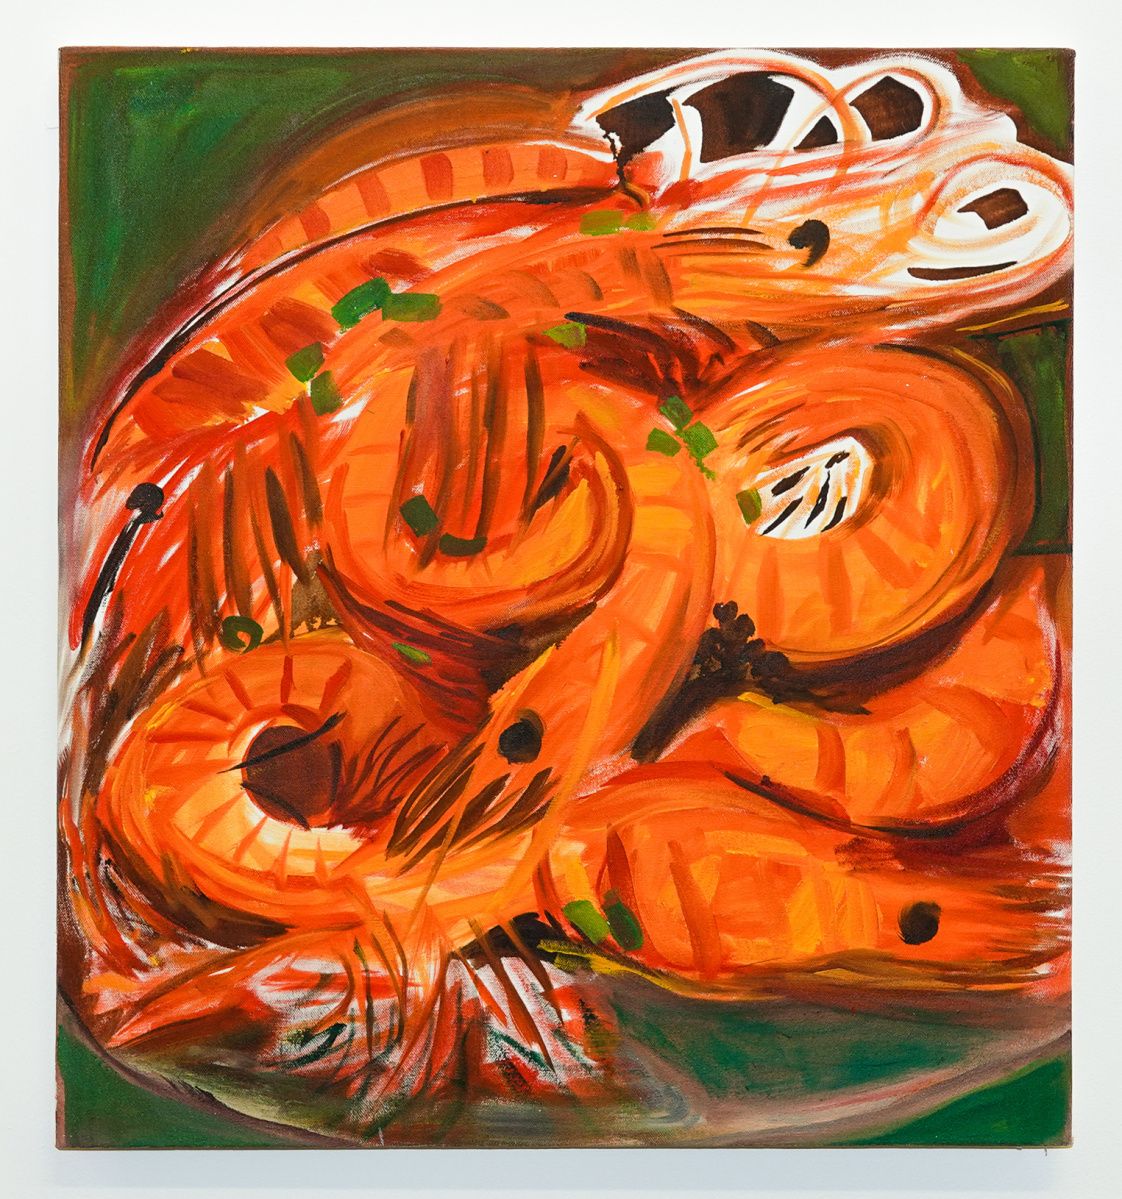 Painting of a fried prawn dish.